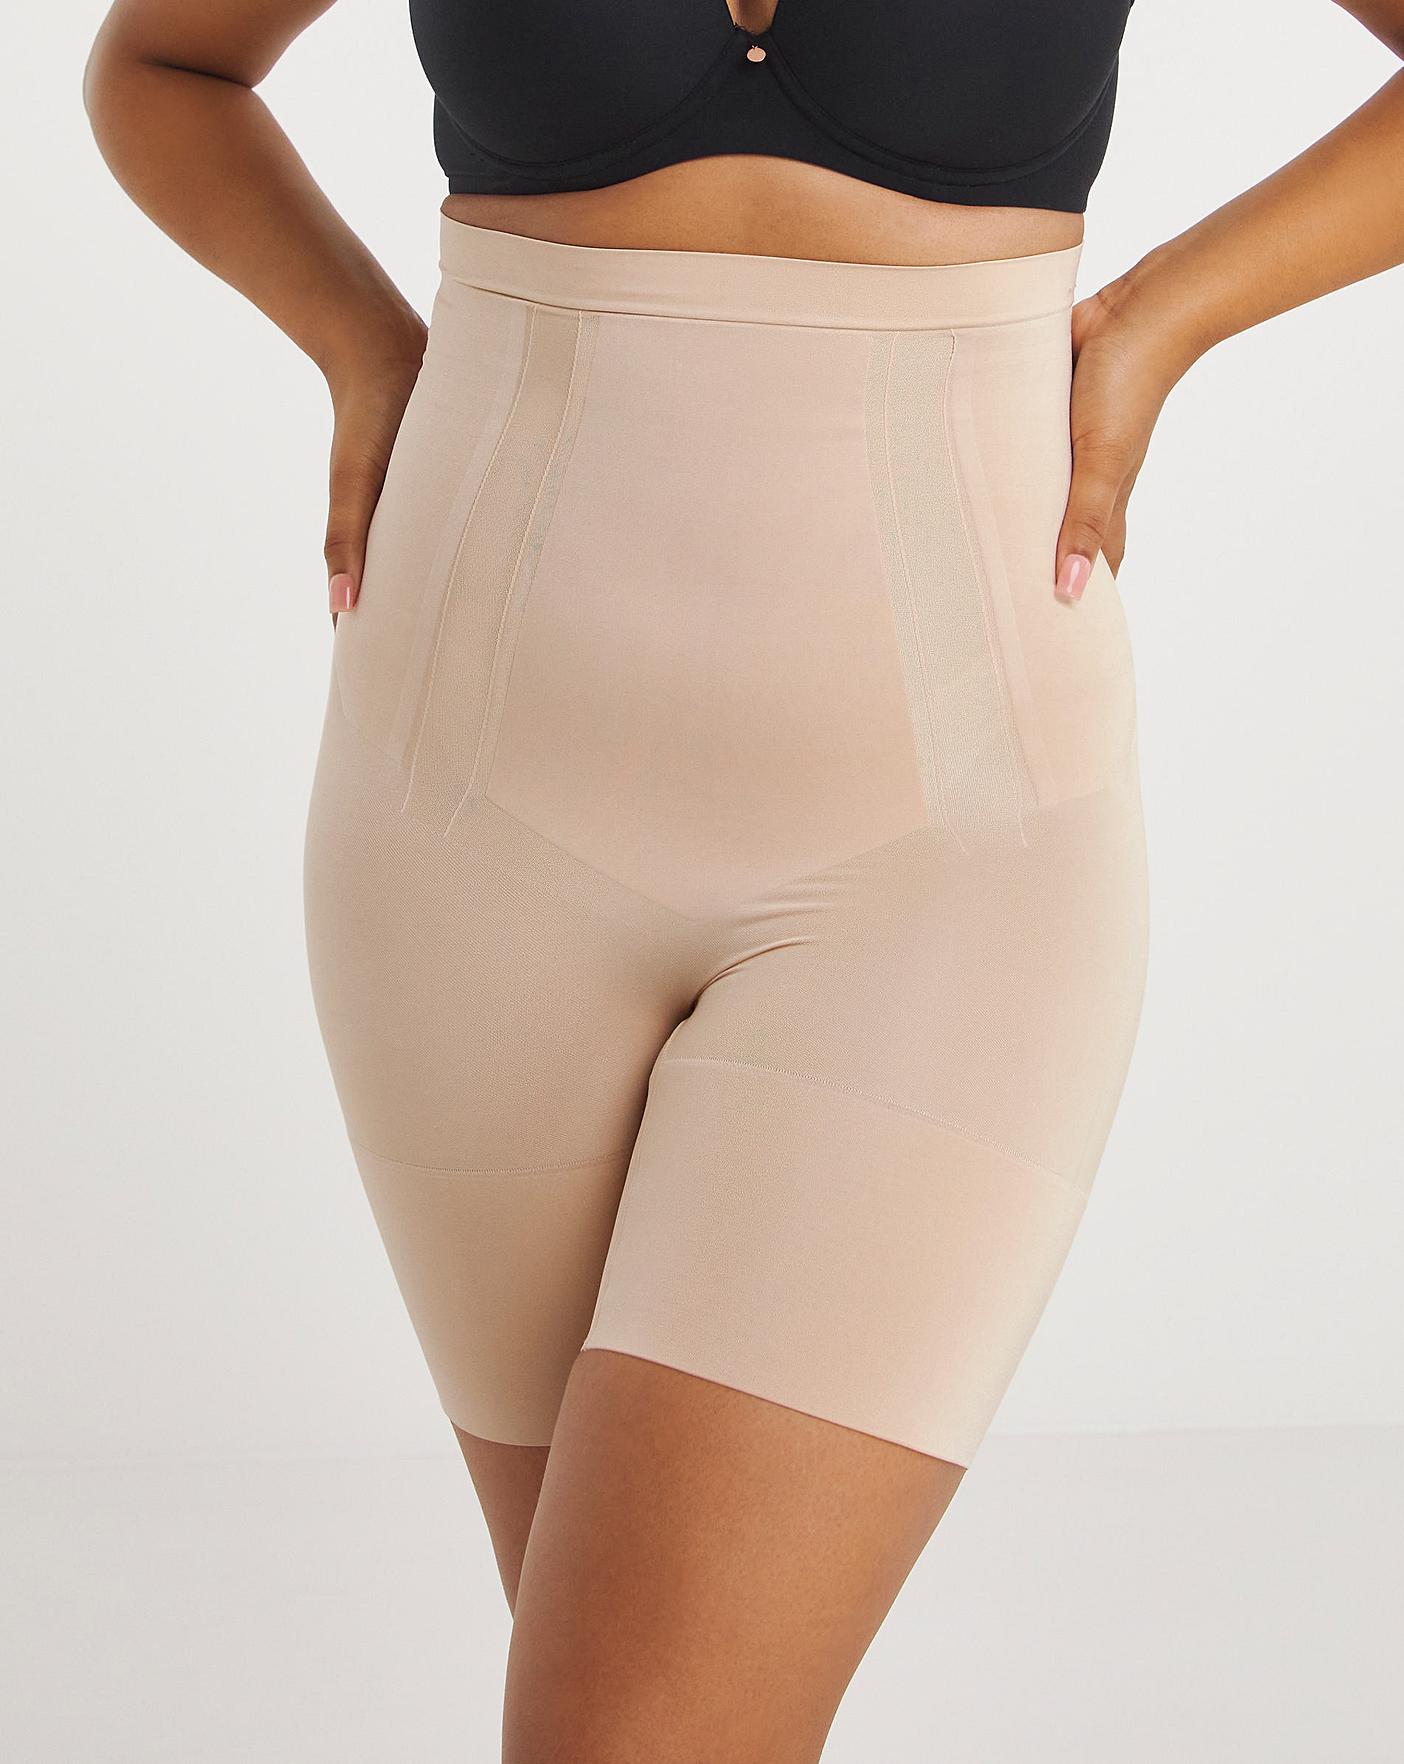 Spanx Oncore Firm Control High-waist Thigh Shaper In Soft Nude